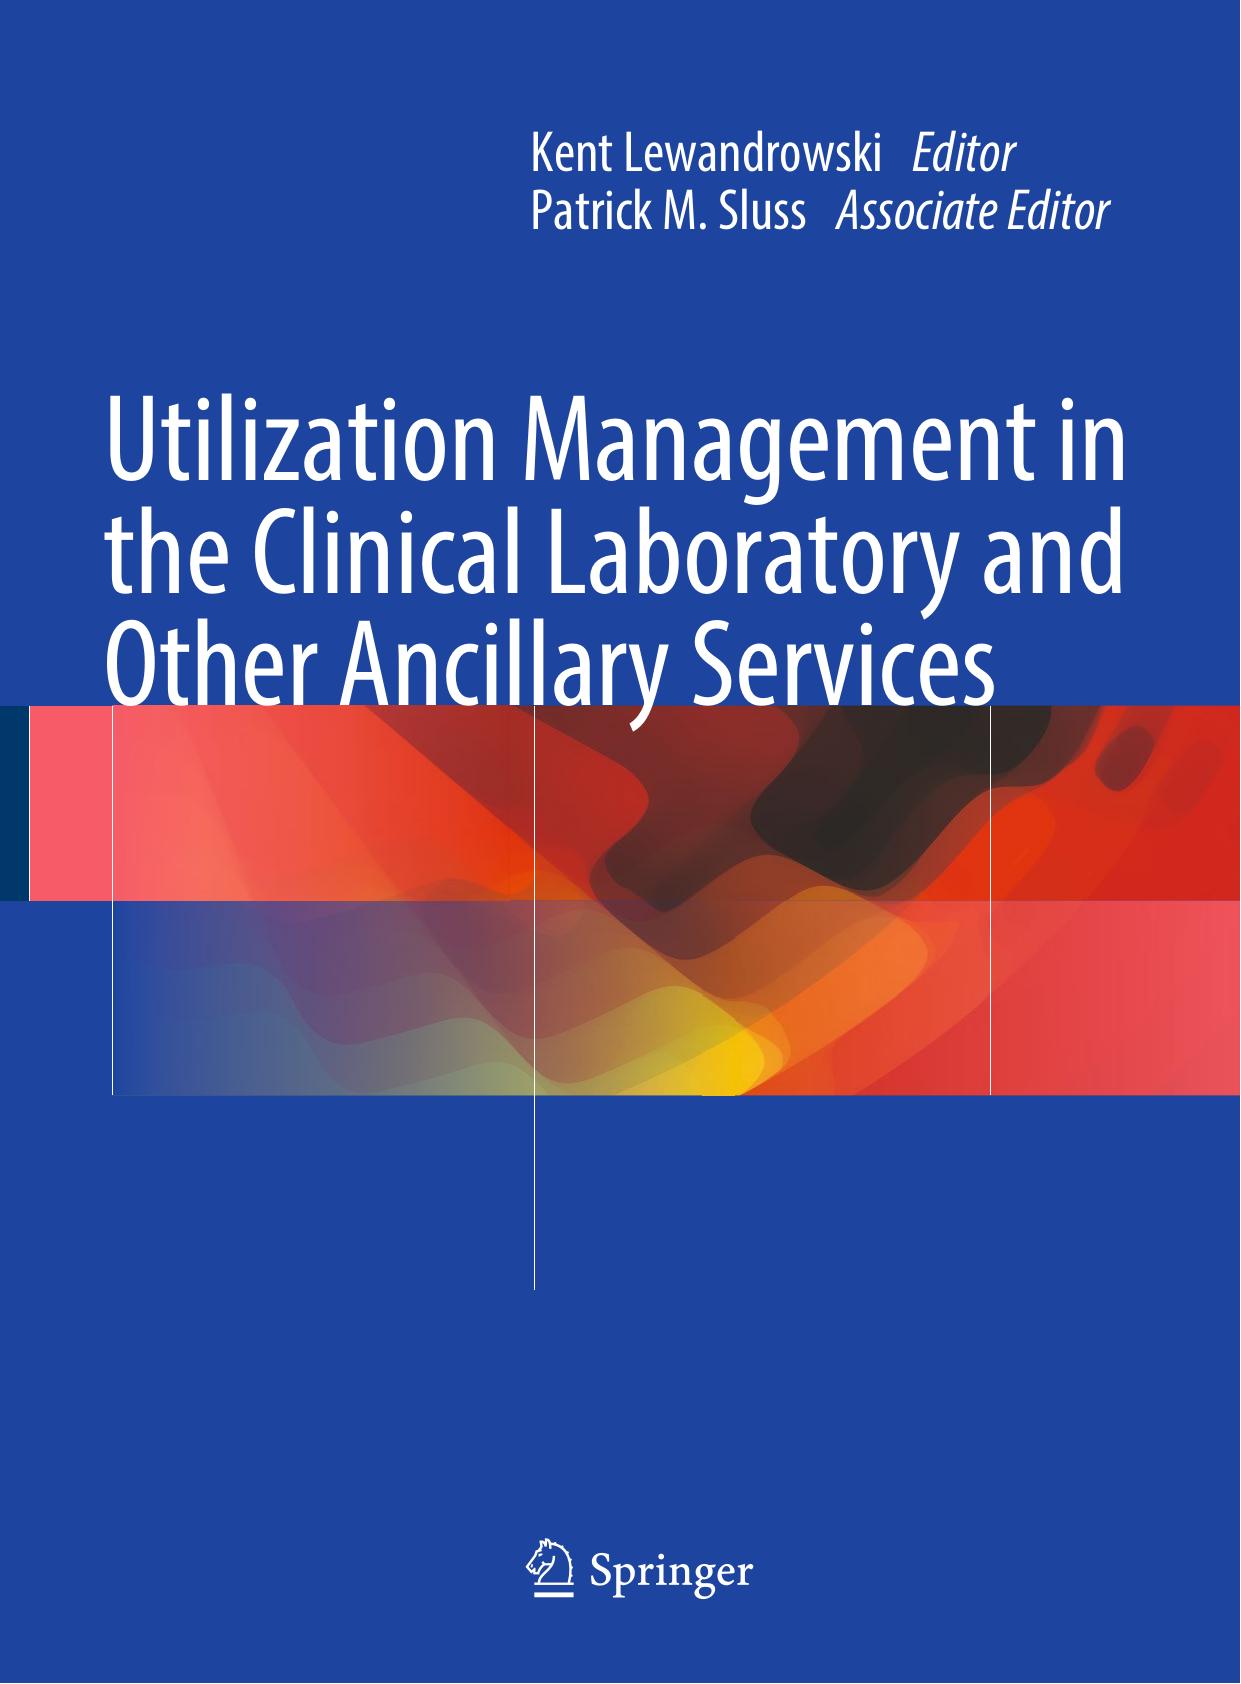 Utilization Management in the Clinical Laboratory and Other Ancillary Services (2017)